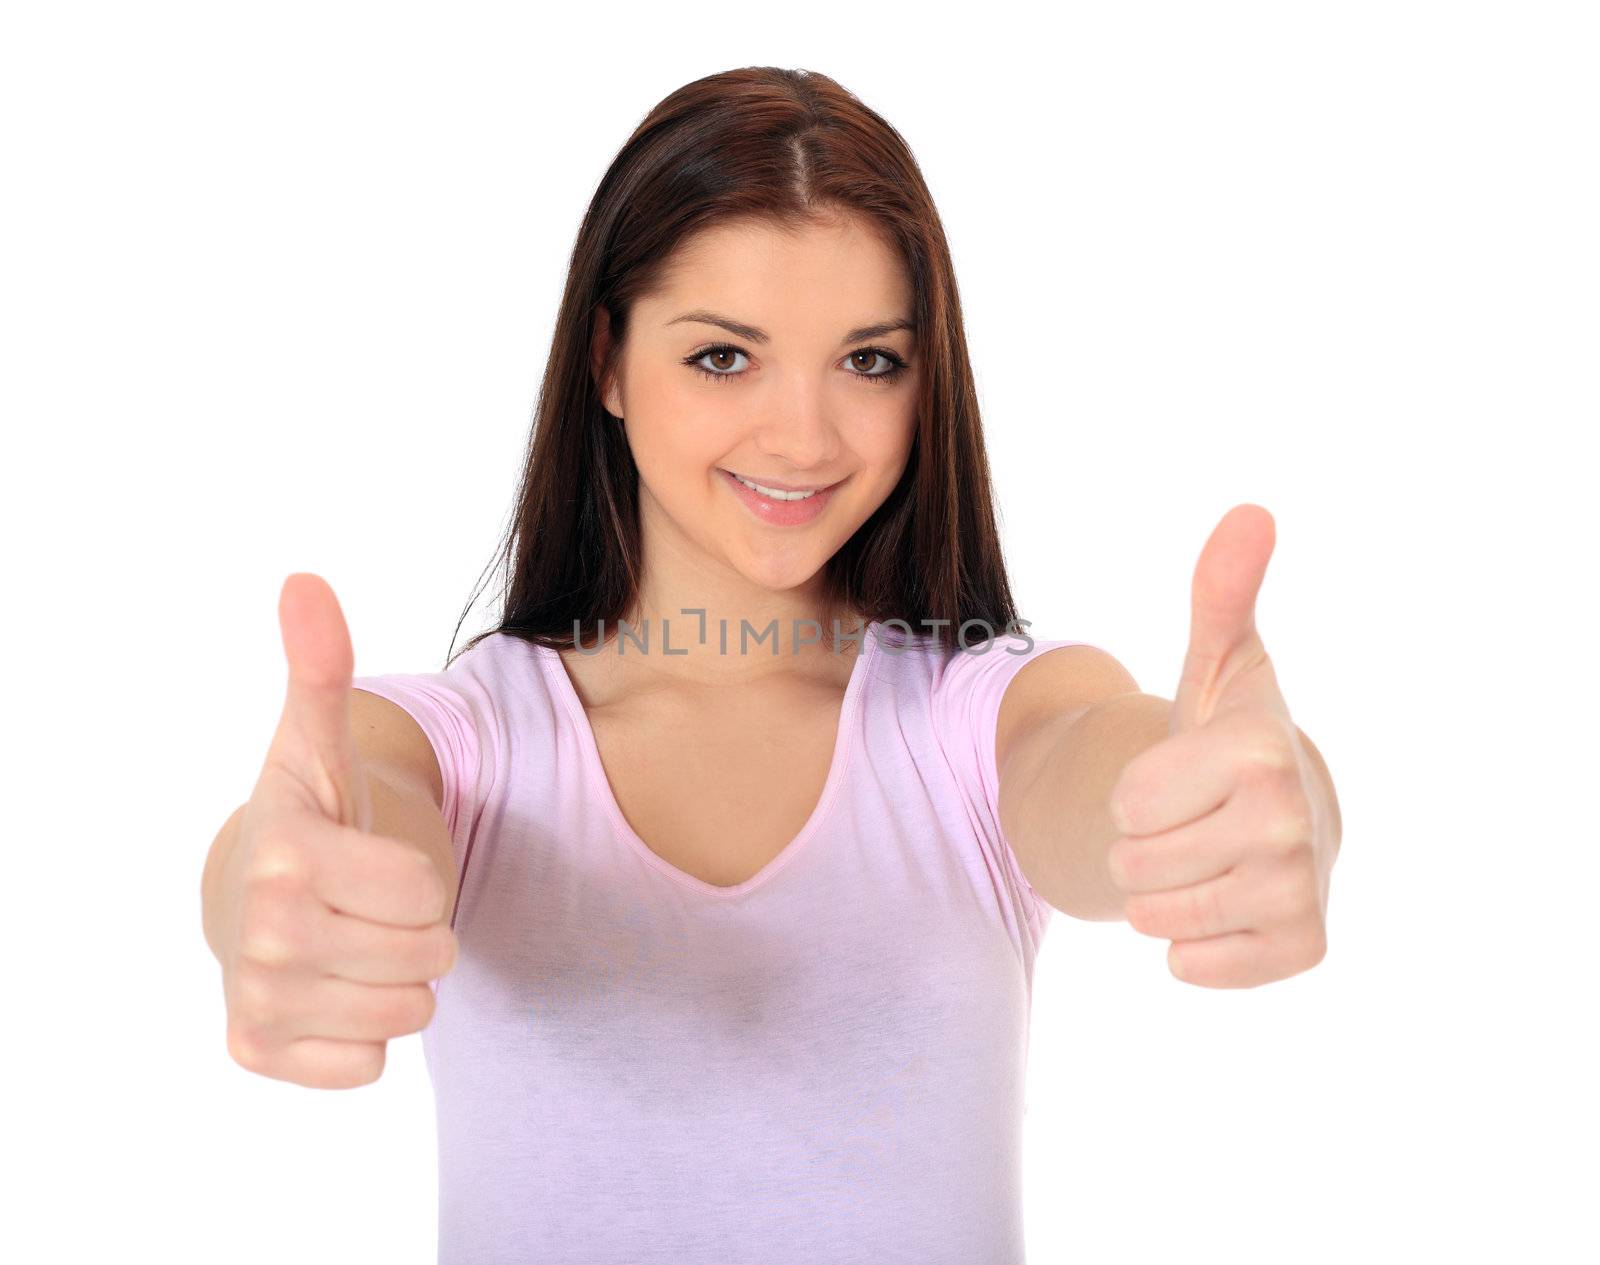 Attractive teenage girl making positive gesture. All on white background.